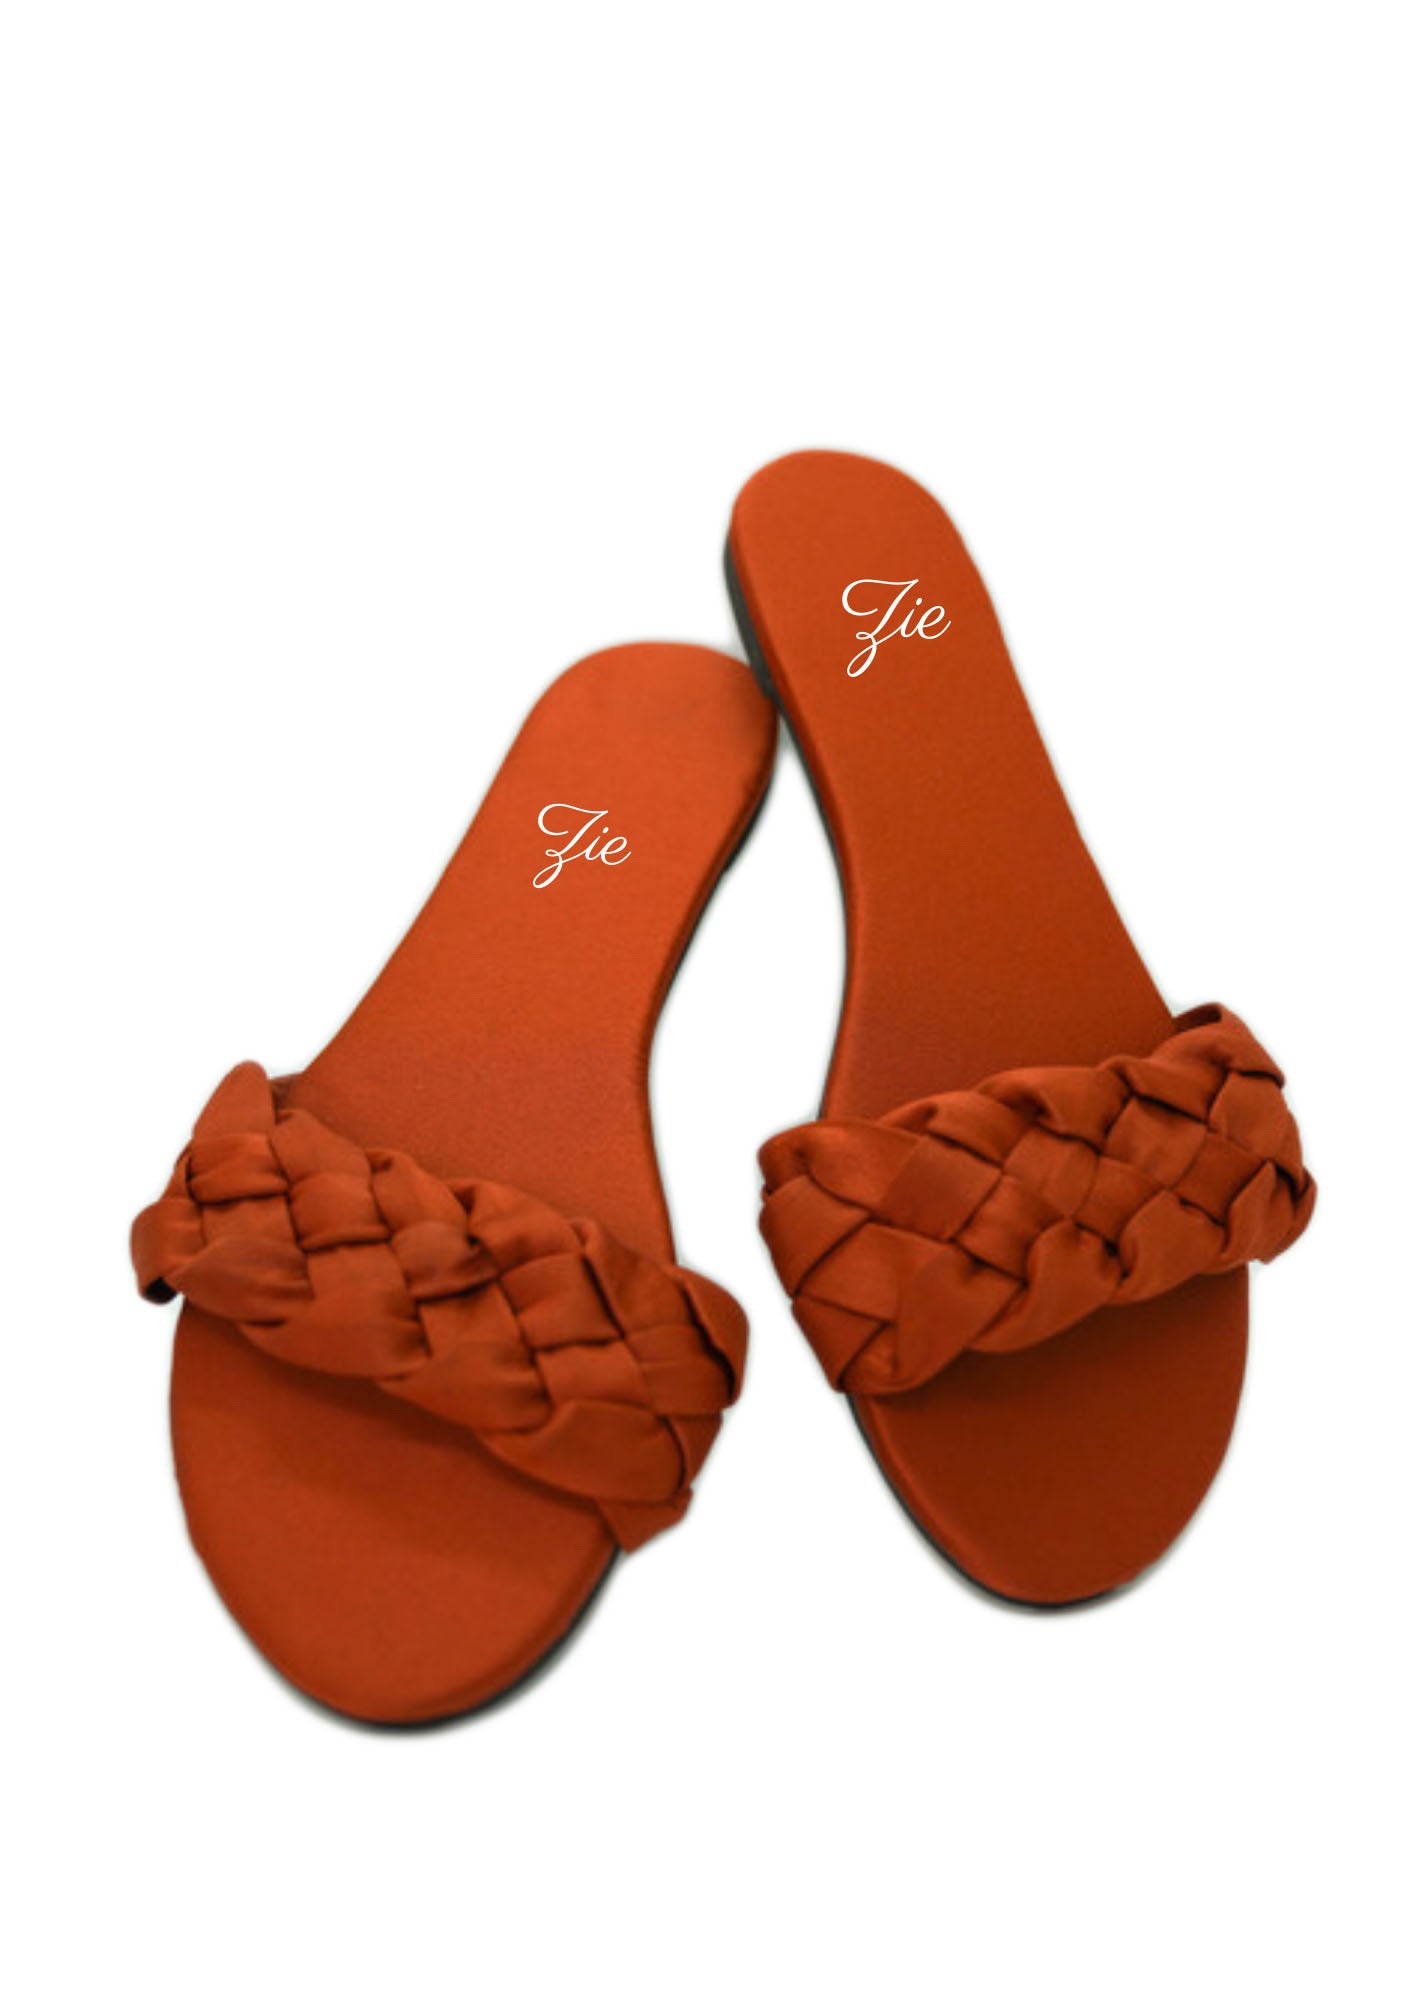 With Love Zie Slippers